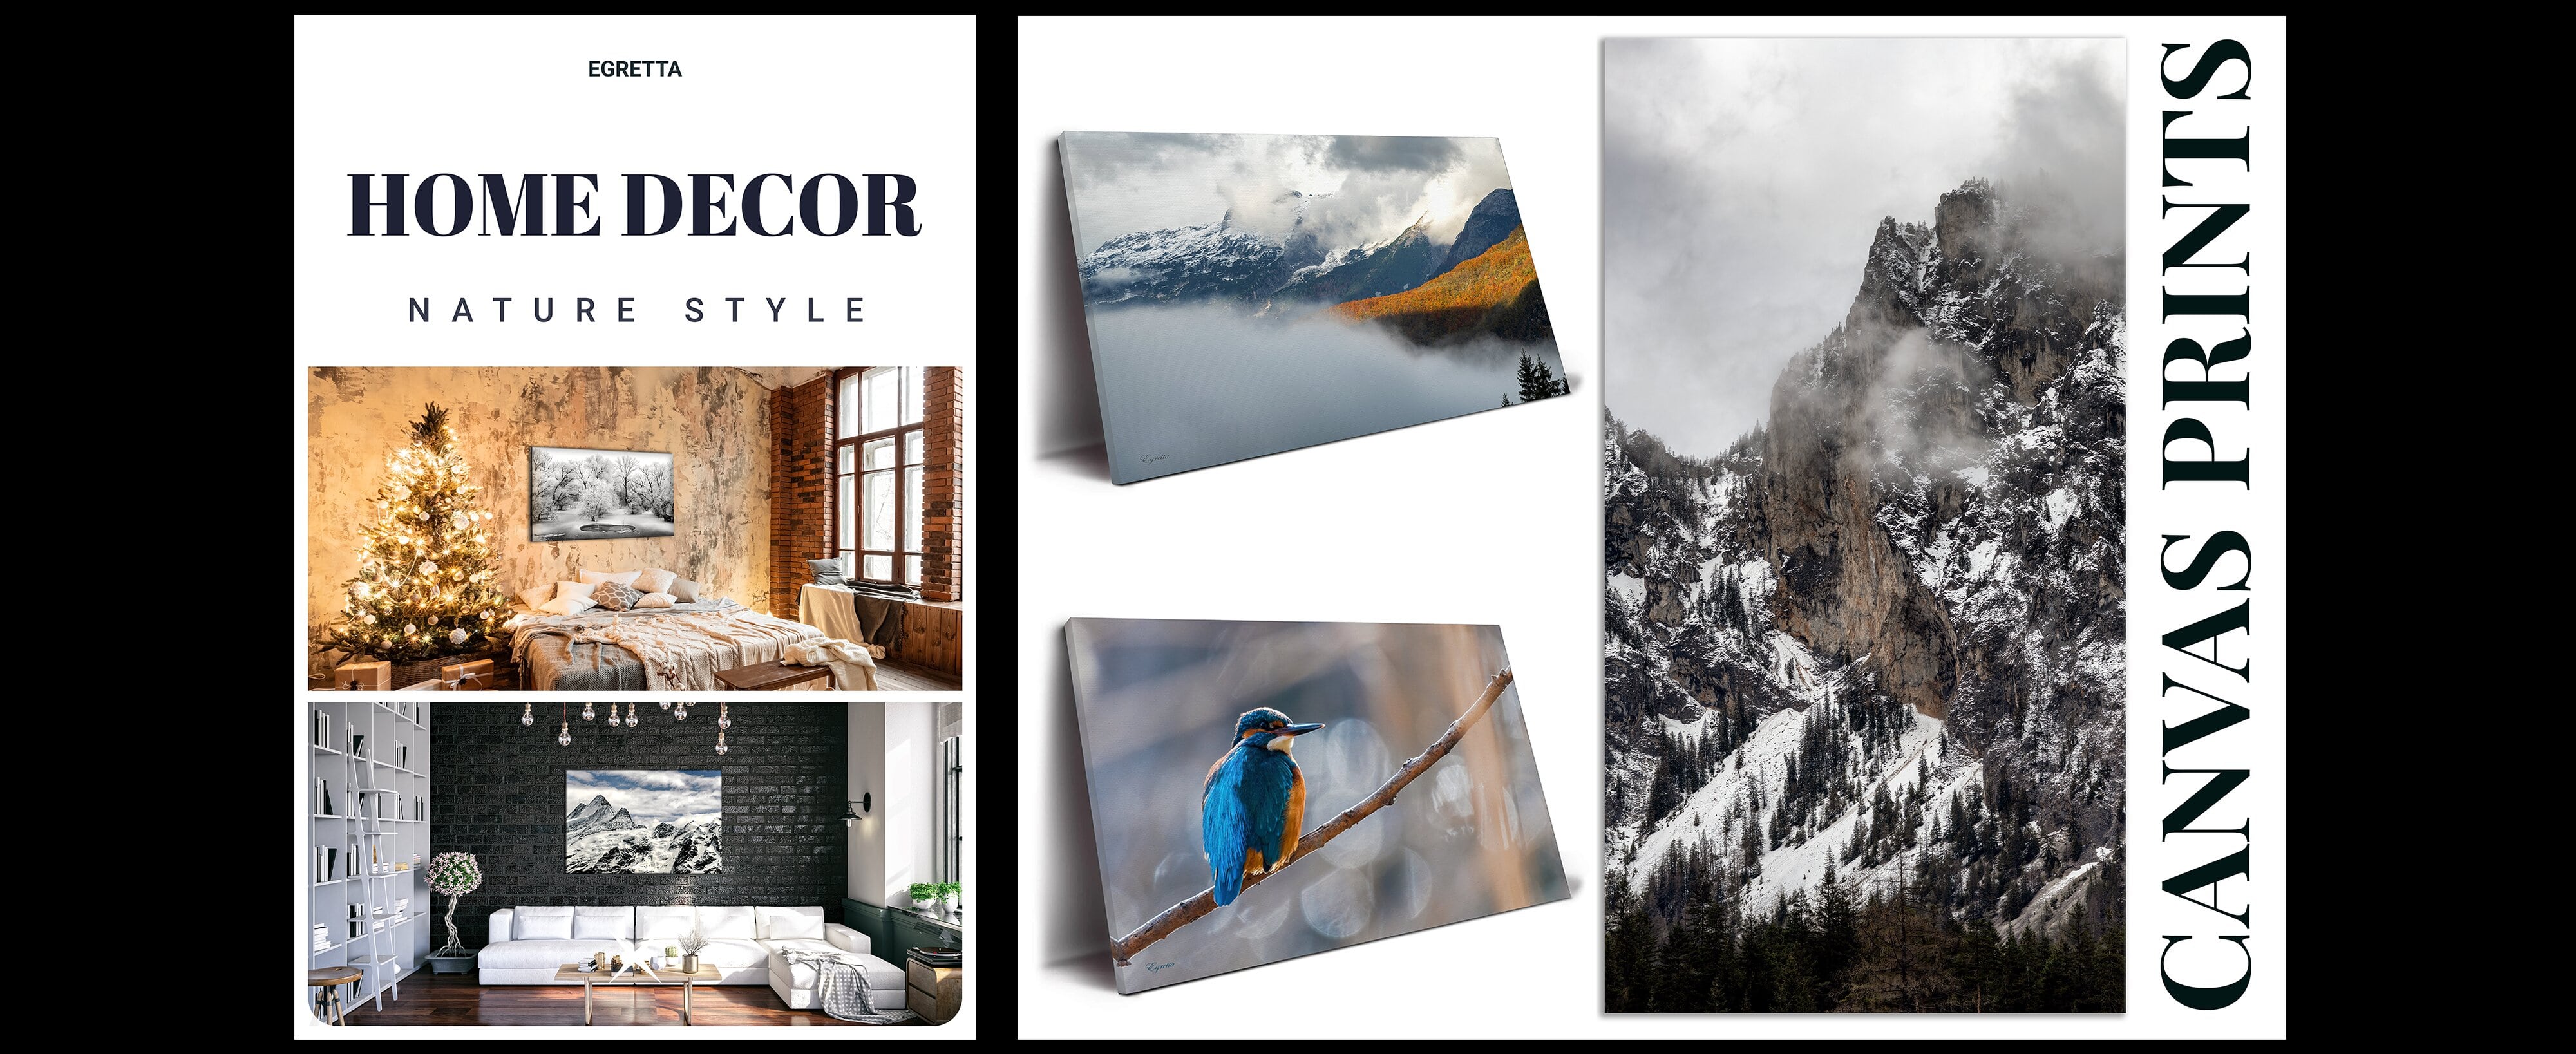 Collection of Egretta home decor canvas prints featuring nature-inspired scenes, with snowy mountain tops, autumn forests, kingfisher bird on a branch, and elegant interior designs with wall-mounted nature canvas art.